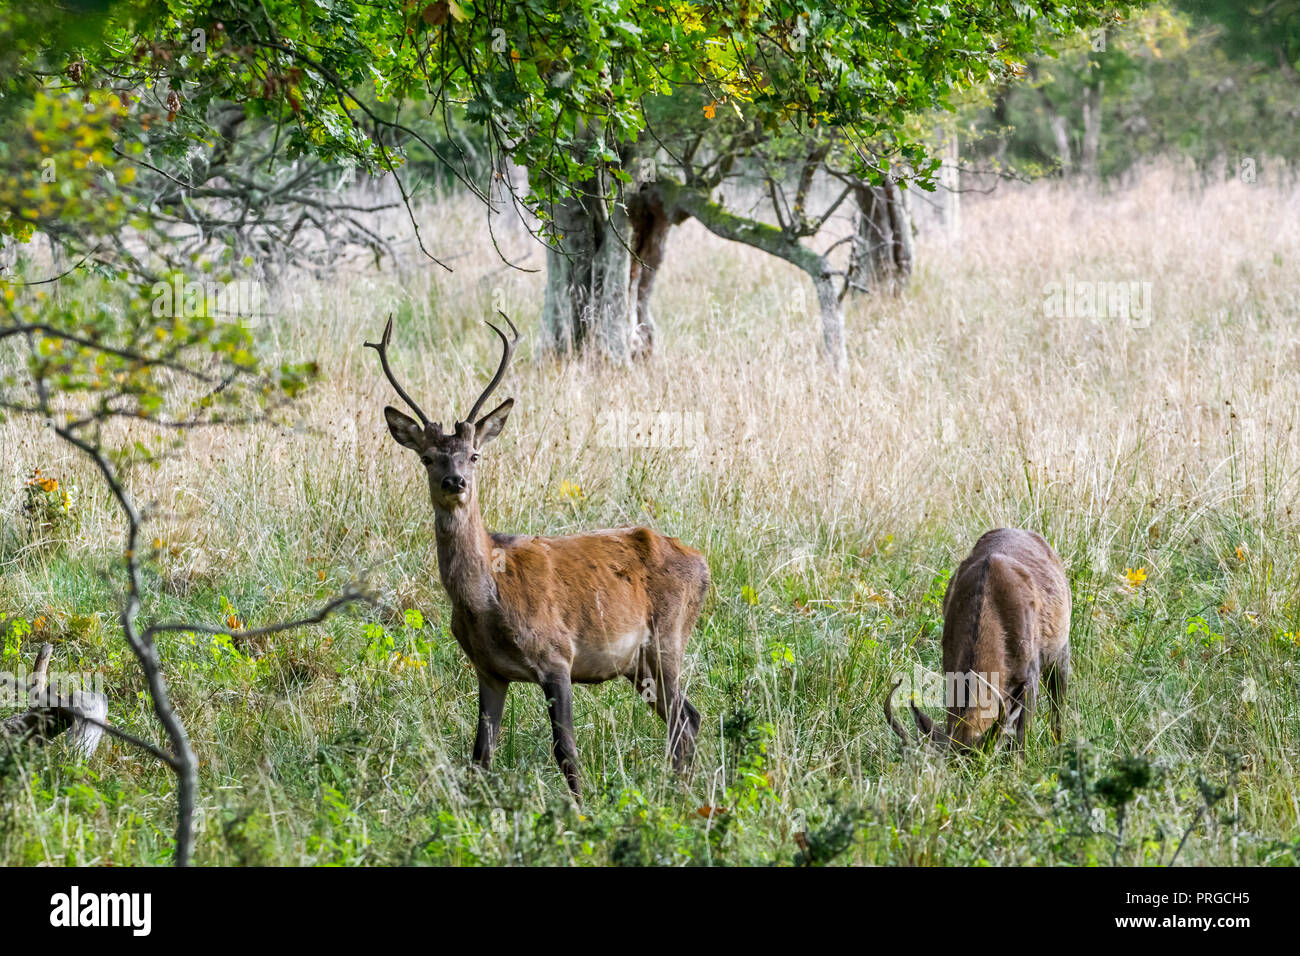 Two year old red deer (Cervus elaphus) stag / male with small antlers during the rut in autumn / fall Stock Photo